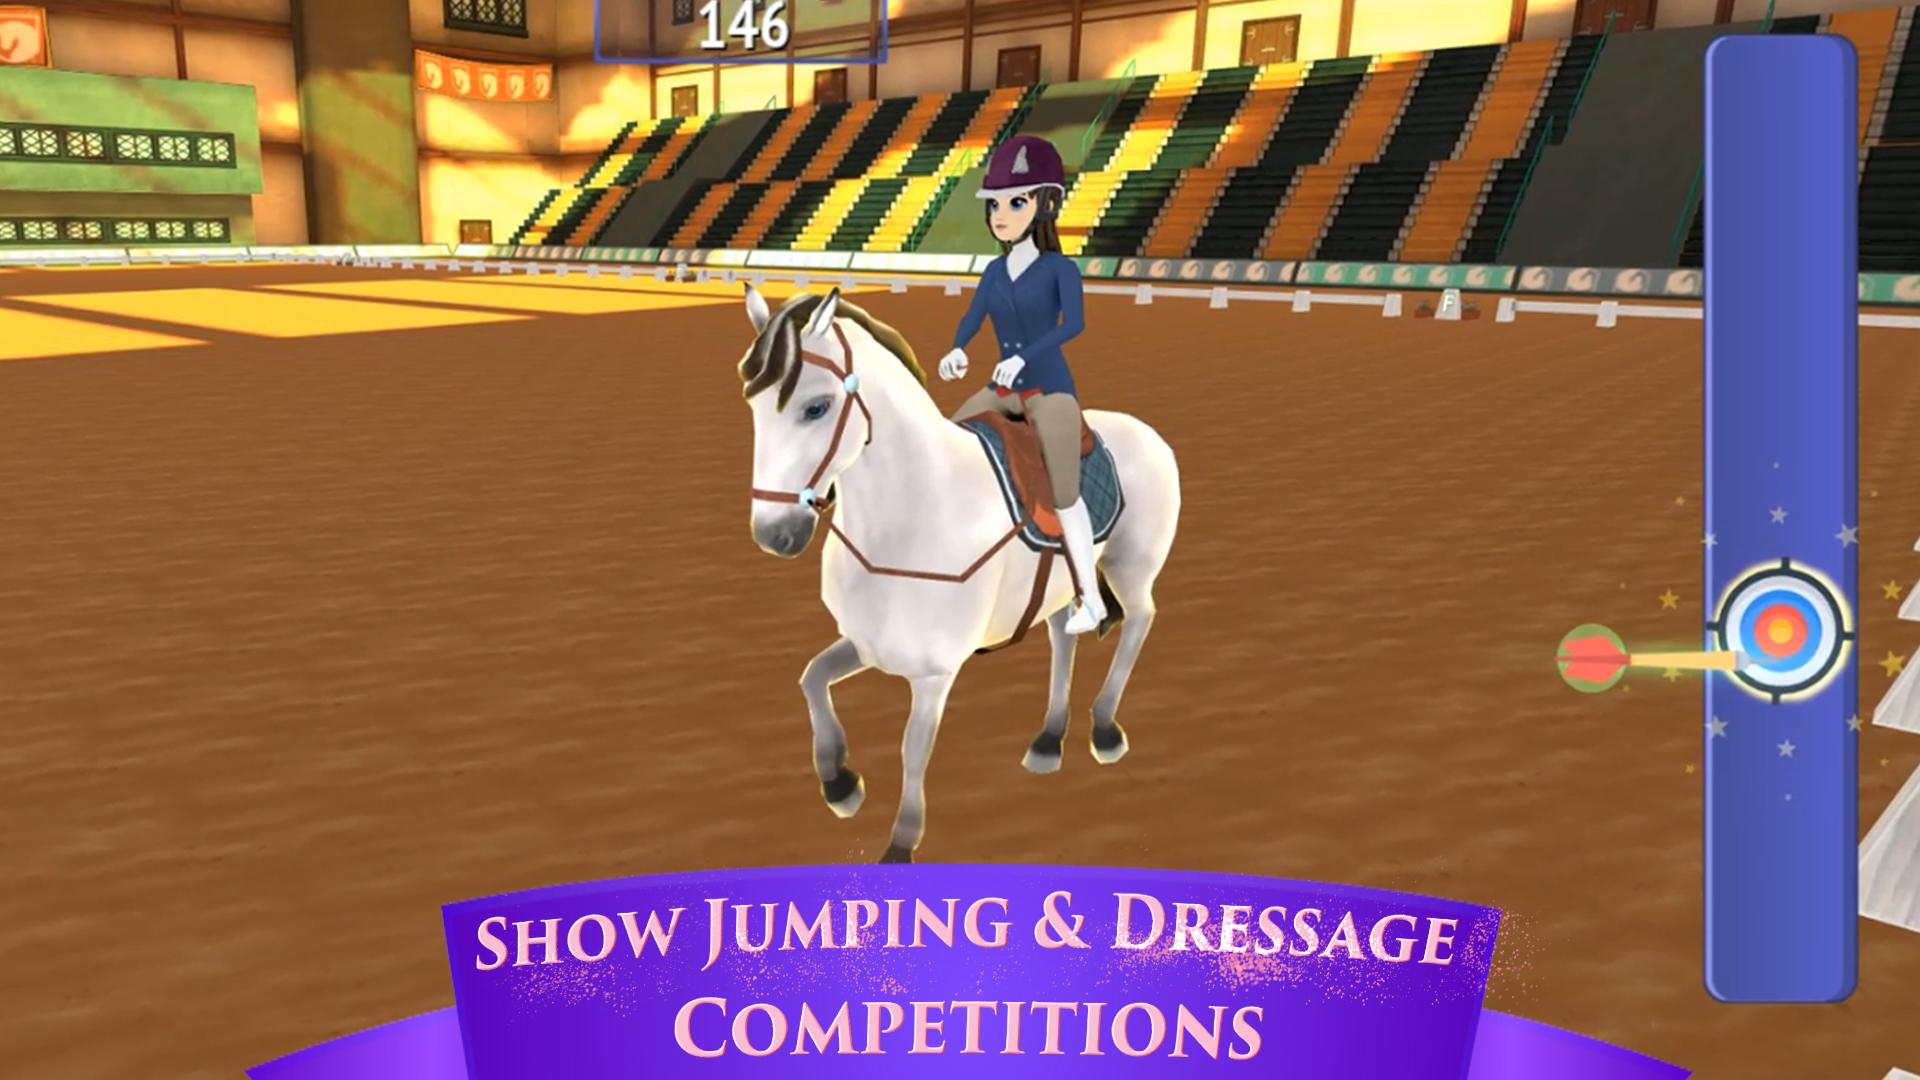 Horse Riding Tales - Ride With Friends 780 Screenshot 5